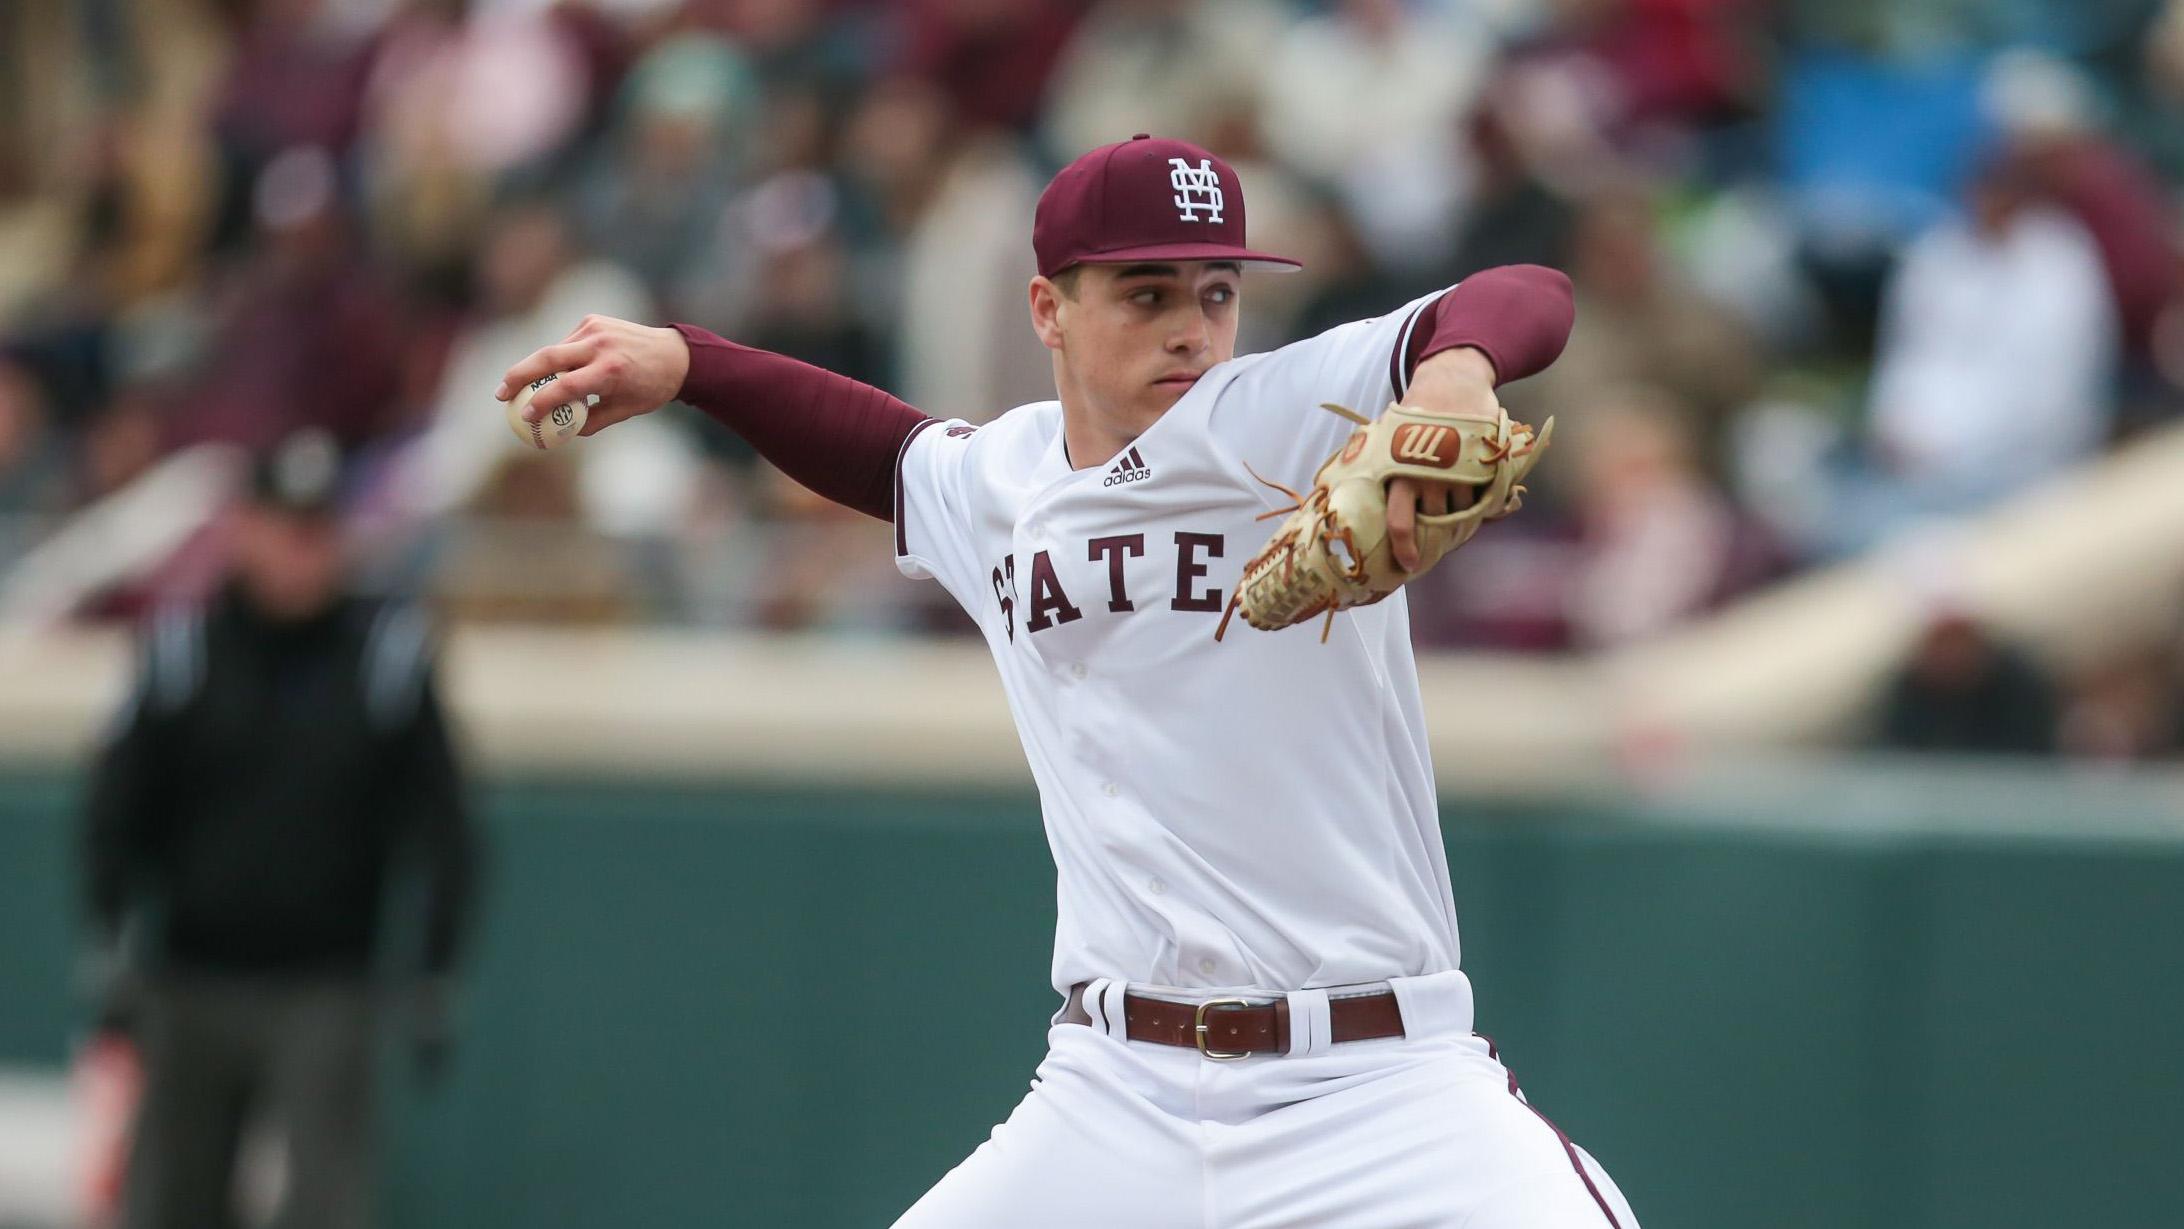 J.T. Ginn in white Miss State jersey throwing a pitch / Keith Warren/USA TODAY